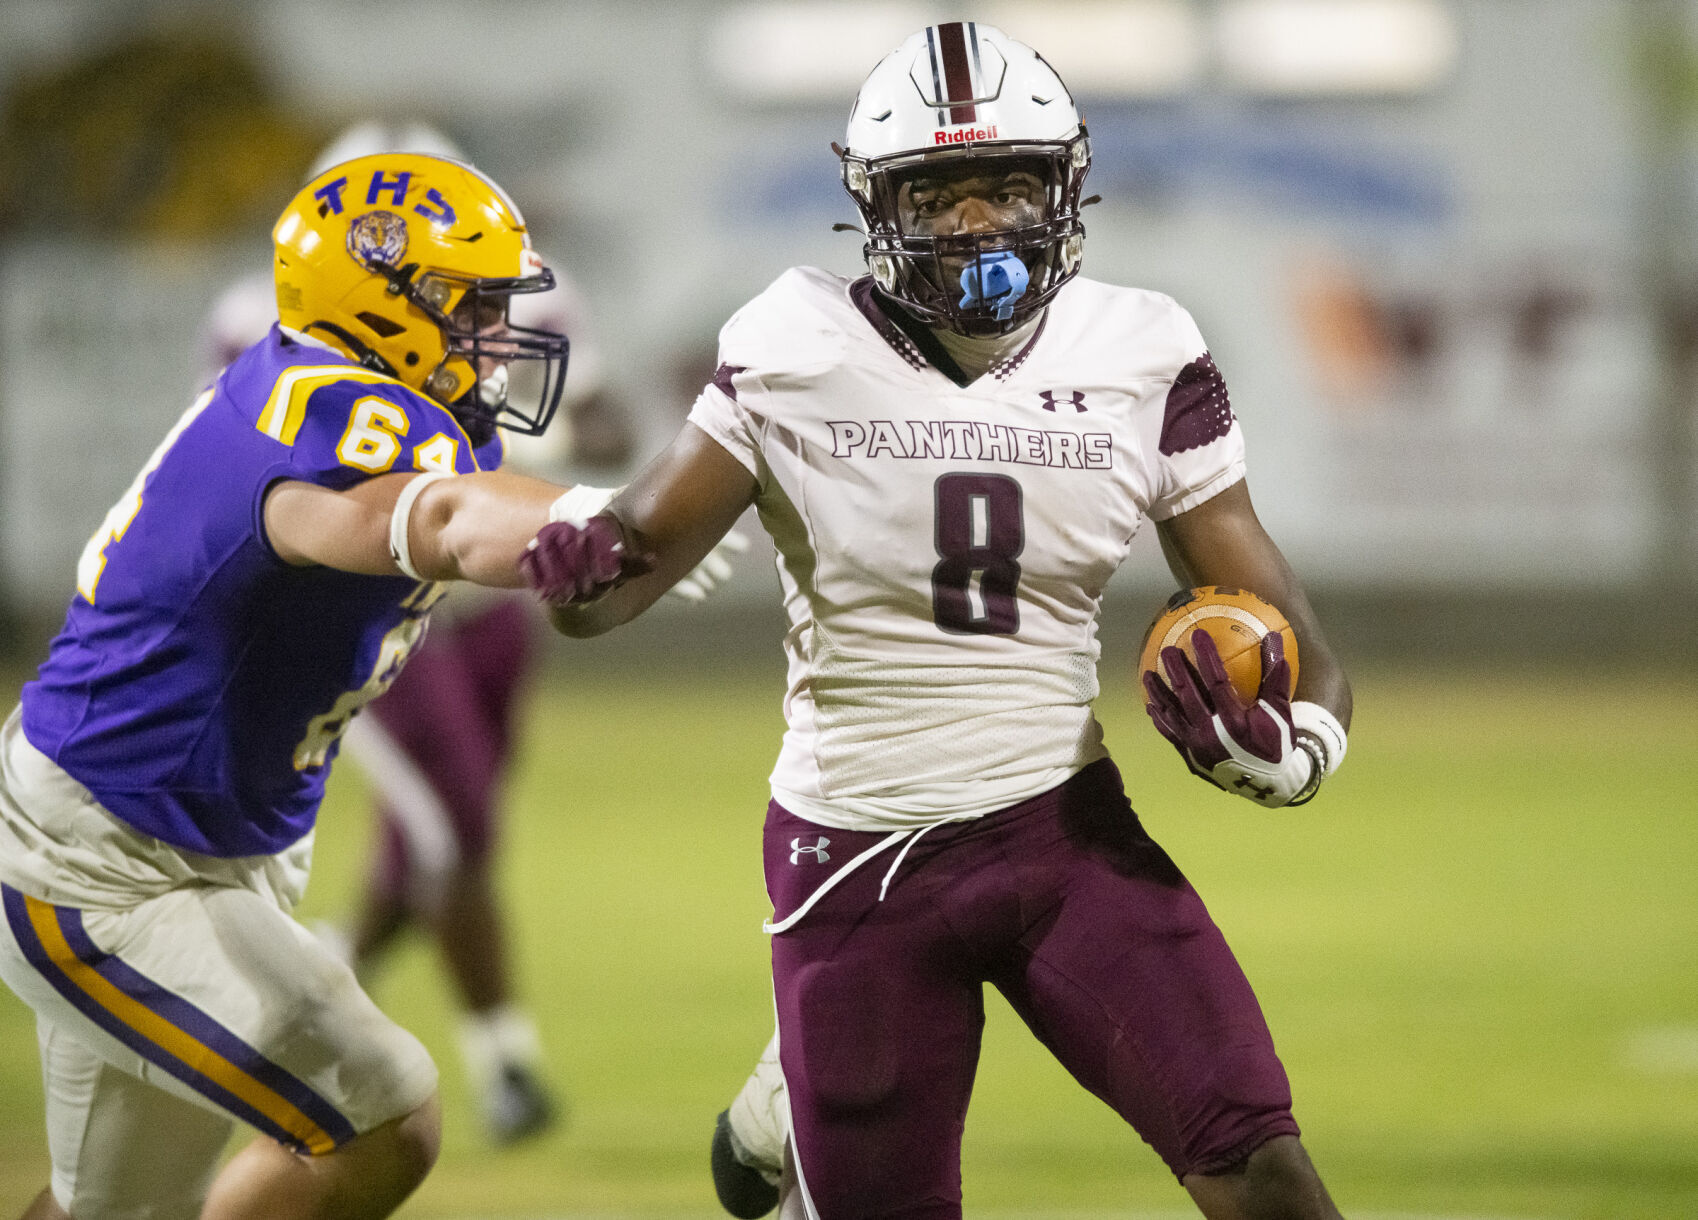 Elmore County Panthers face tough challenge against Faith Academy in Class 5A playoffs